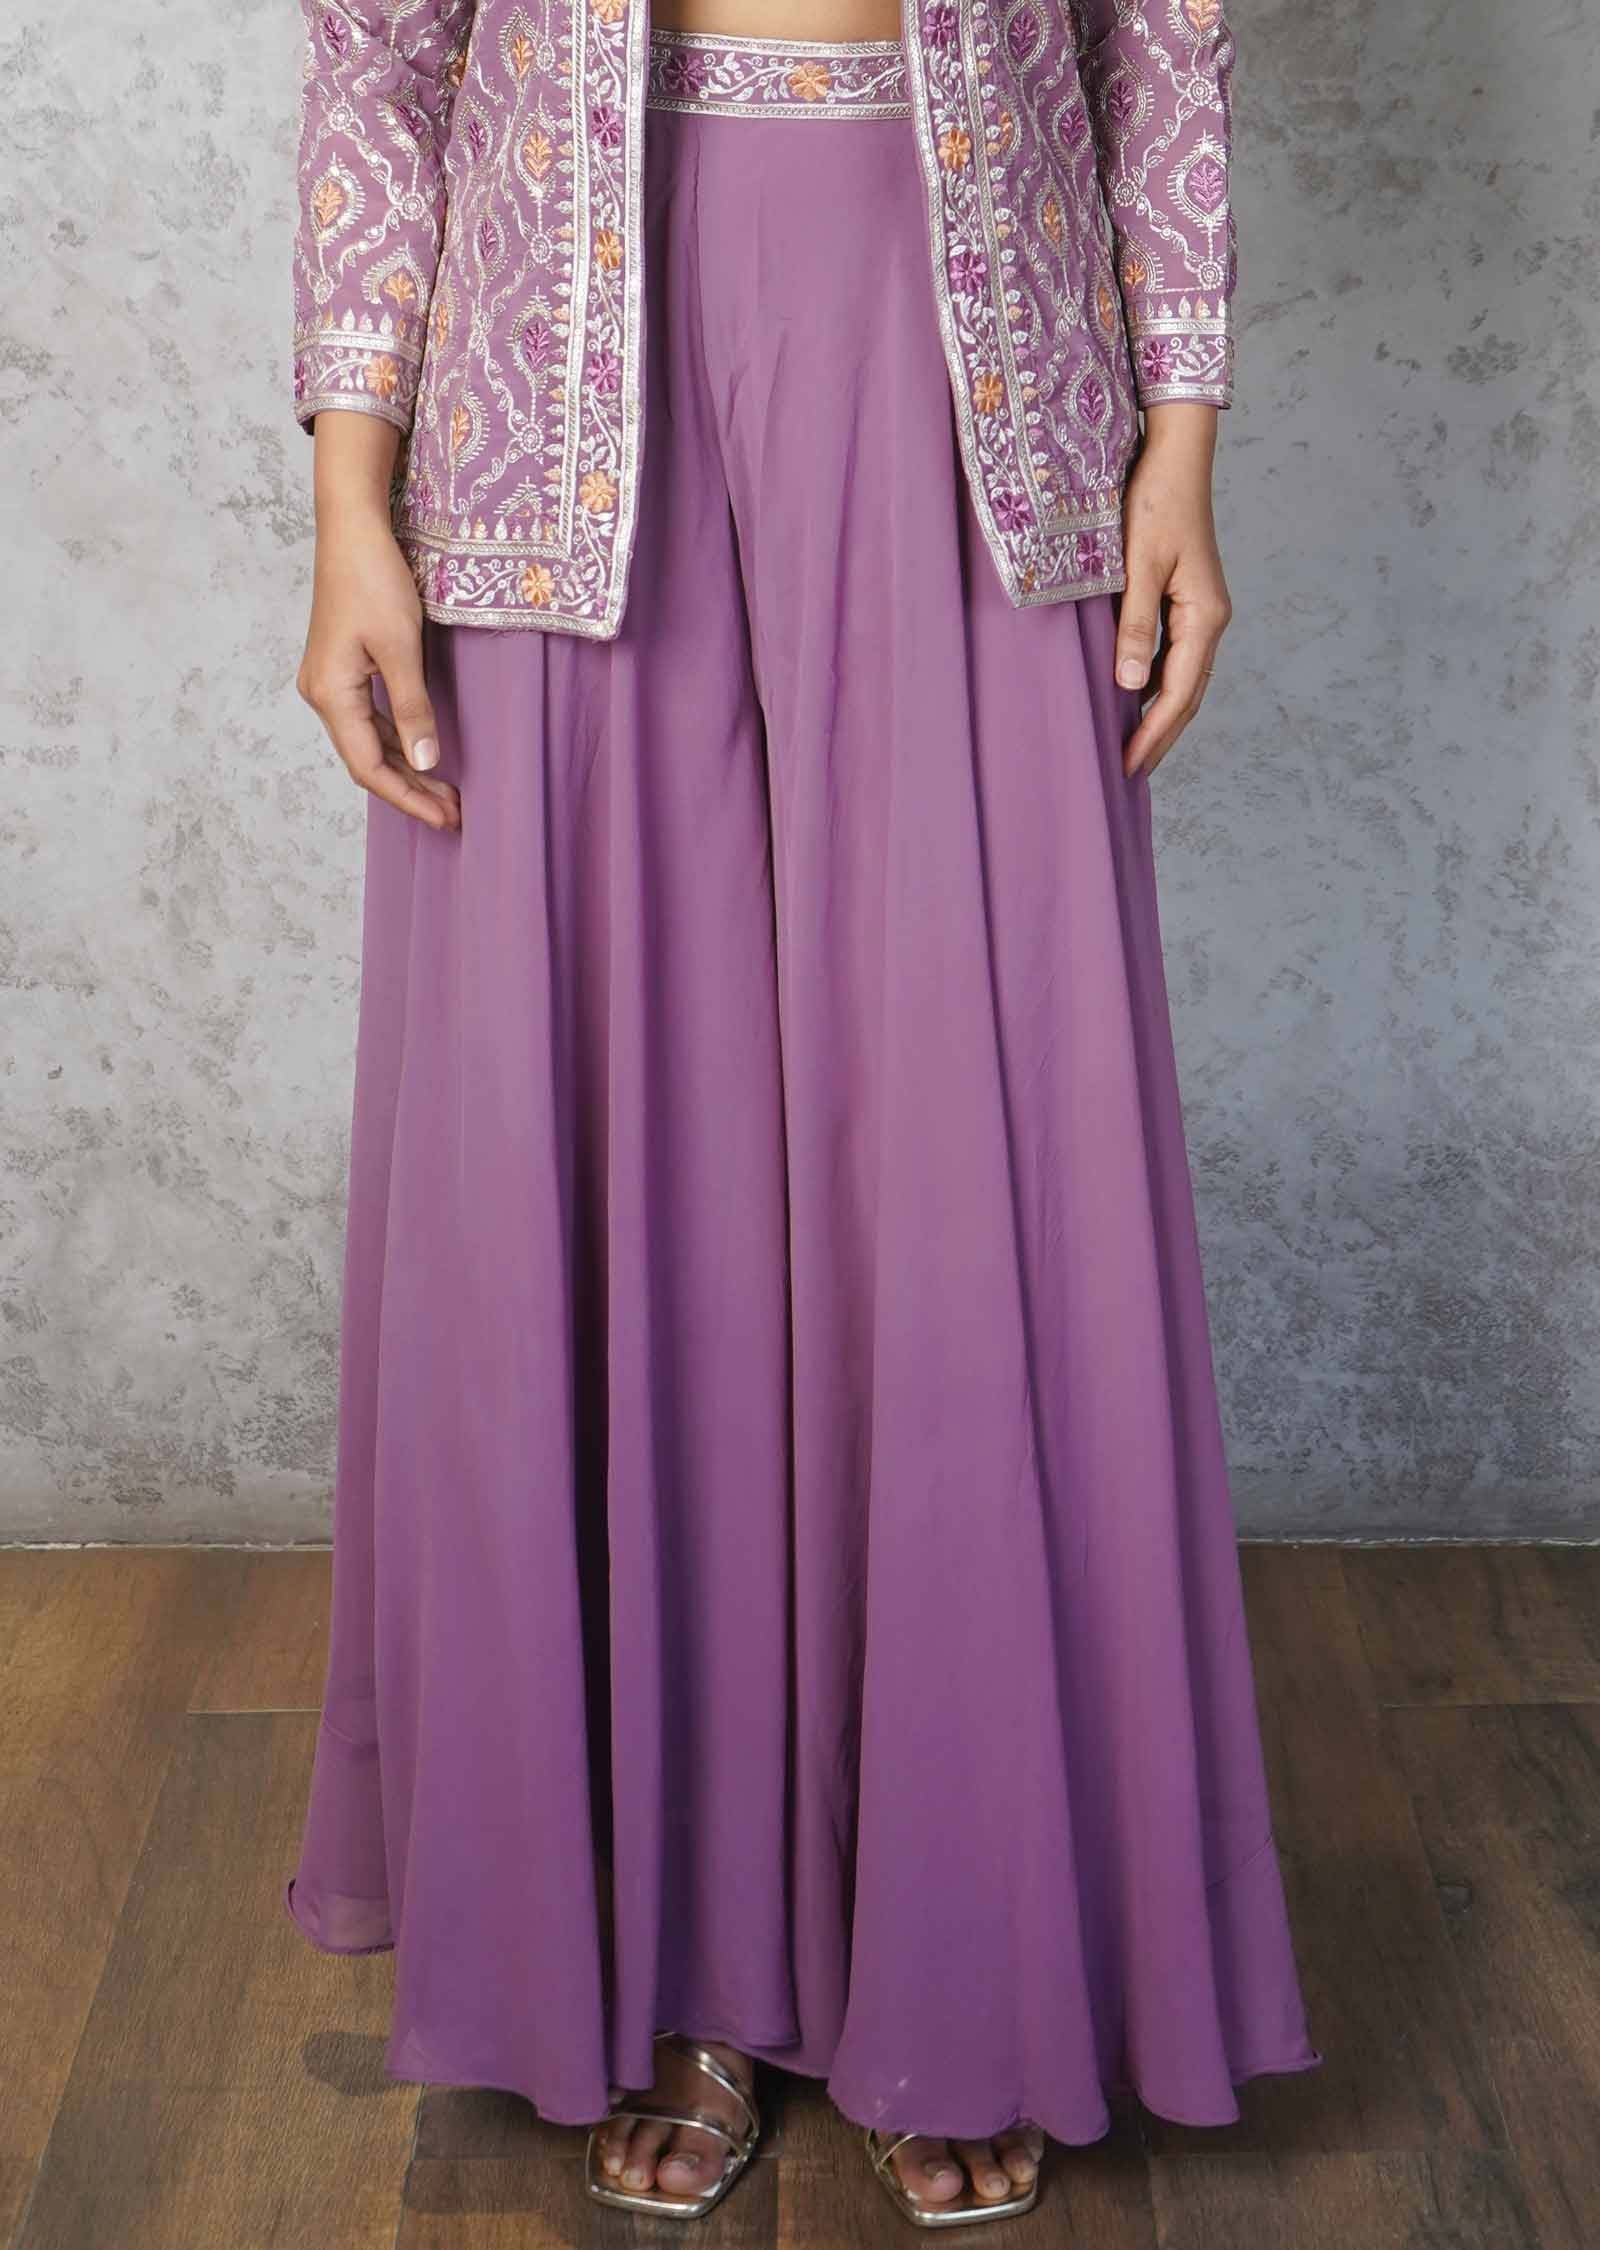 Pink Georgette Fusion Indo-Western Outfit